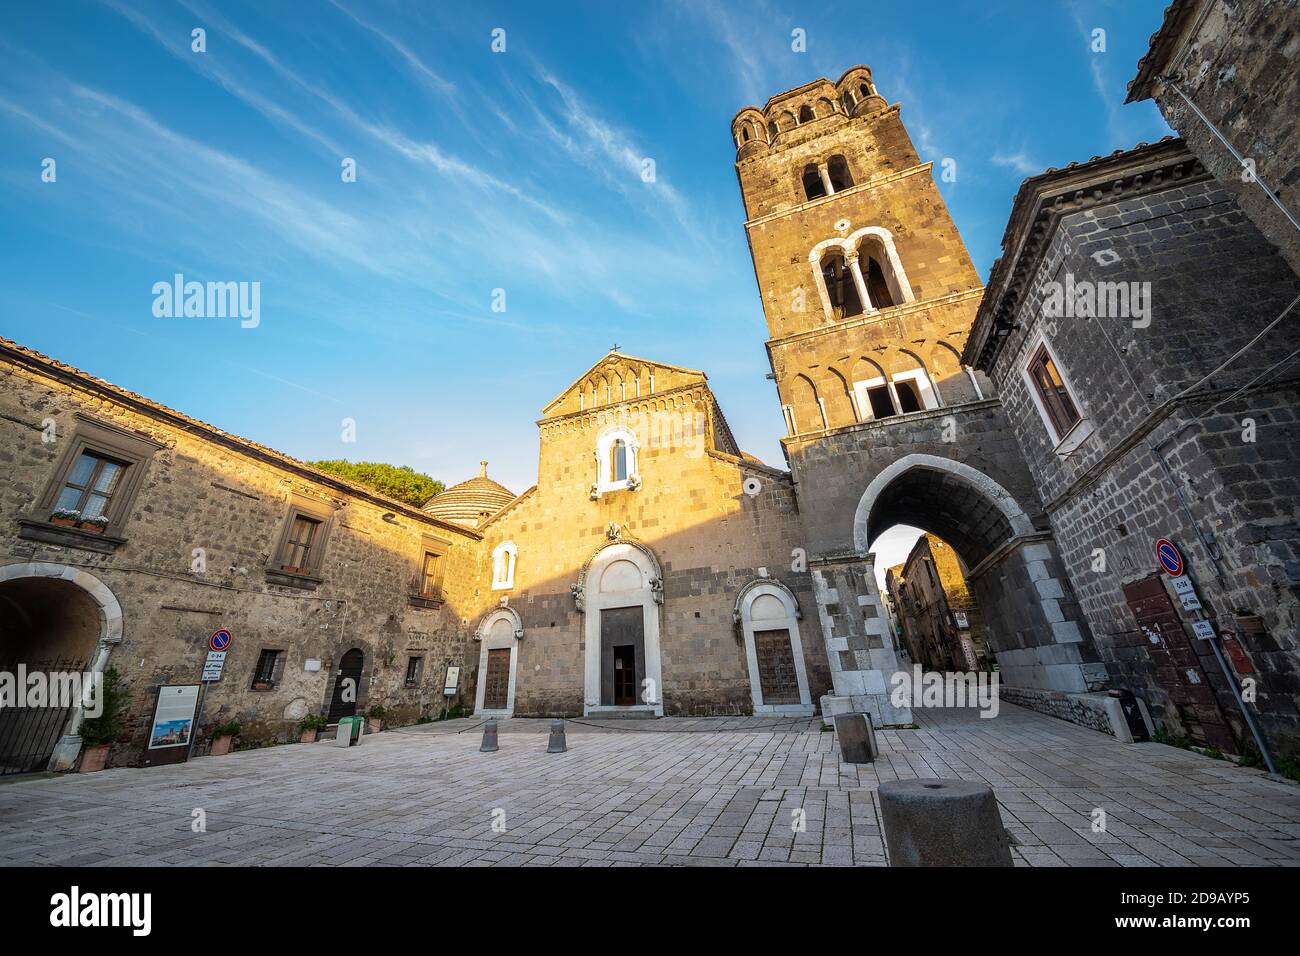 The dome of Casertavecchia, Cathedral of San Michele Arcangelo and his bell tower, Archangel St. Michael. Small medieval town. Caserta, Campania, Italy Stock Photo